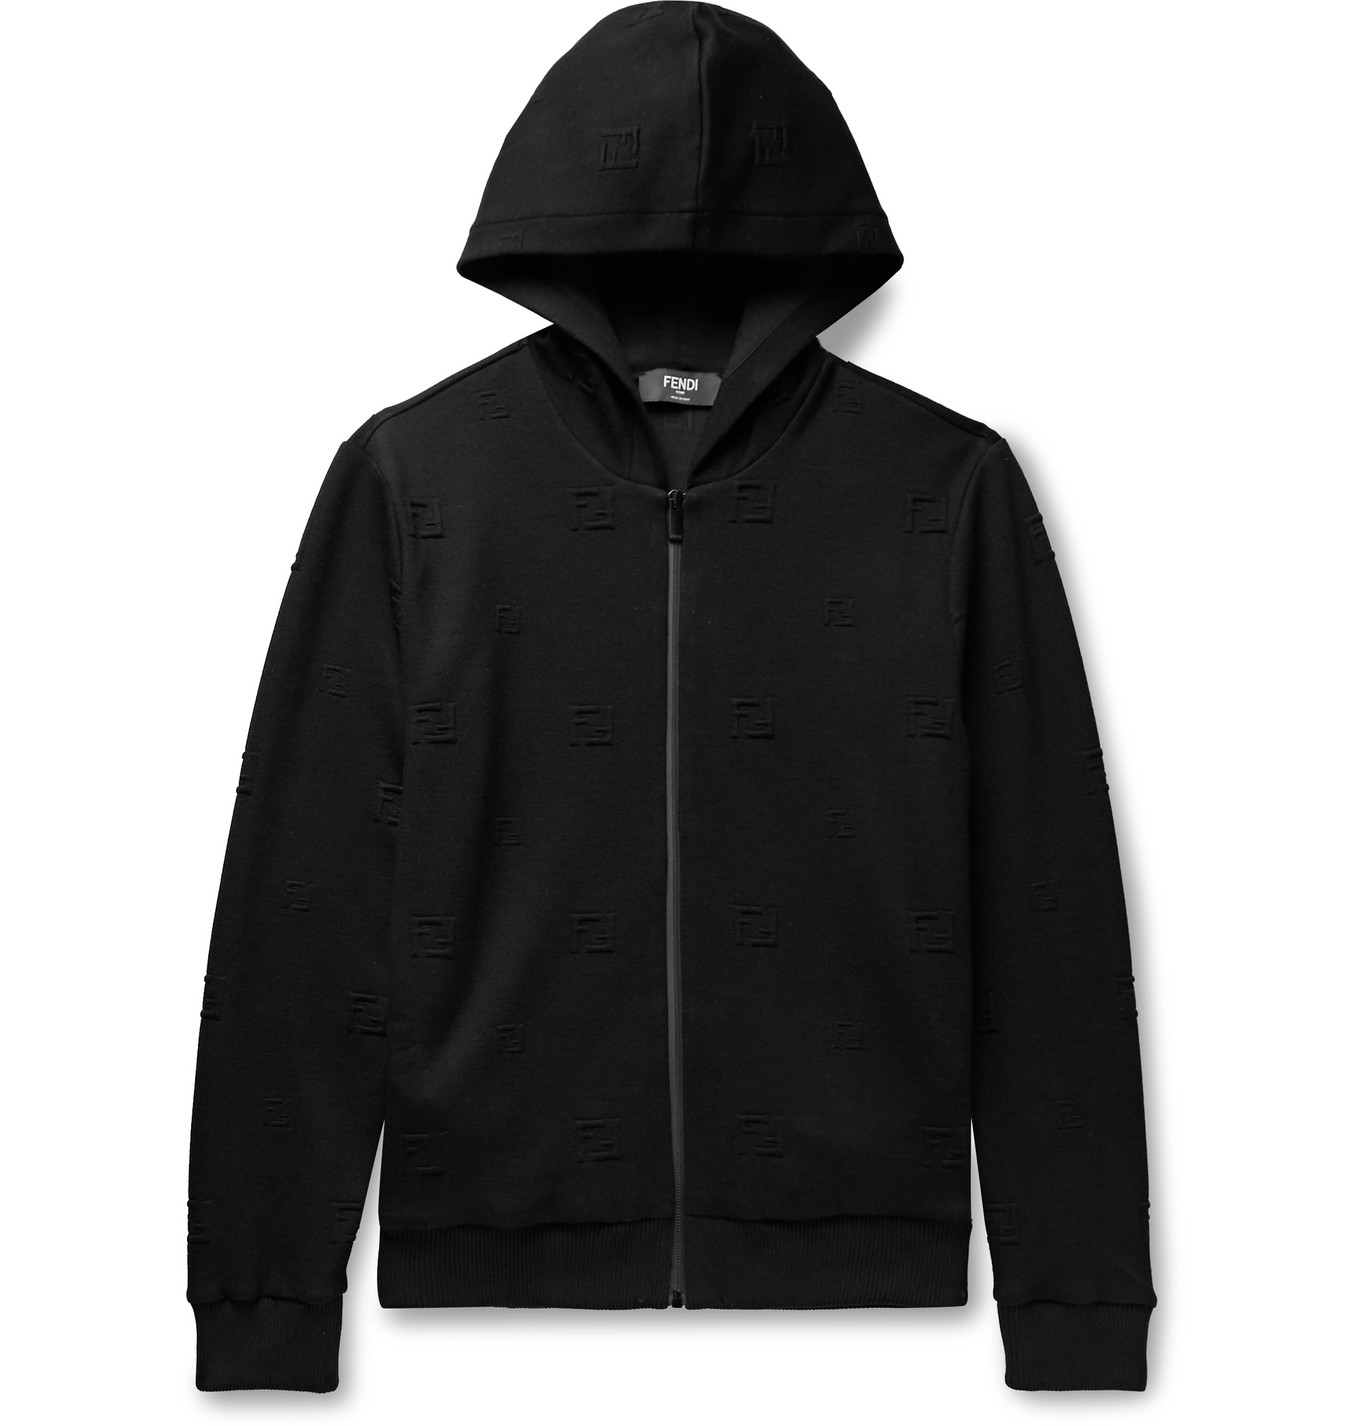 jersey jacket with hood